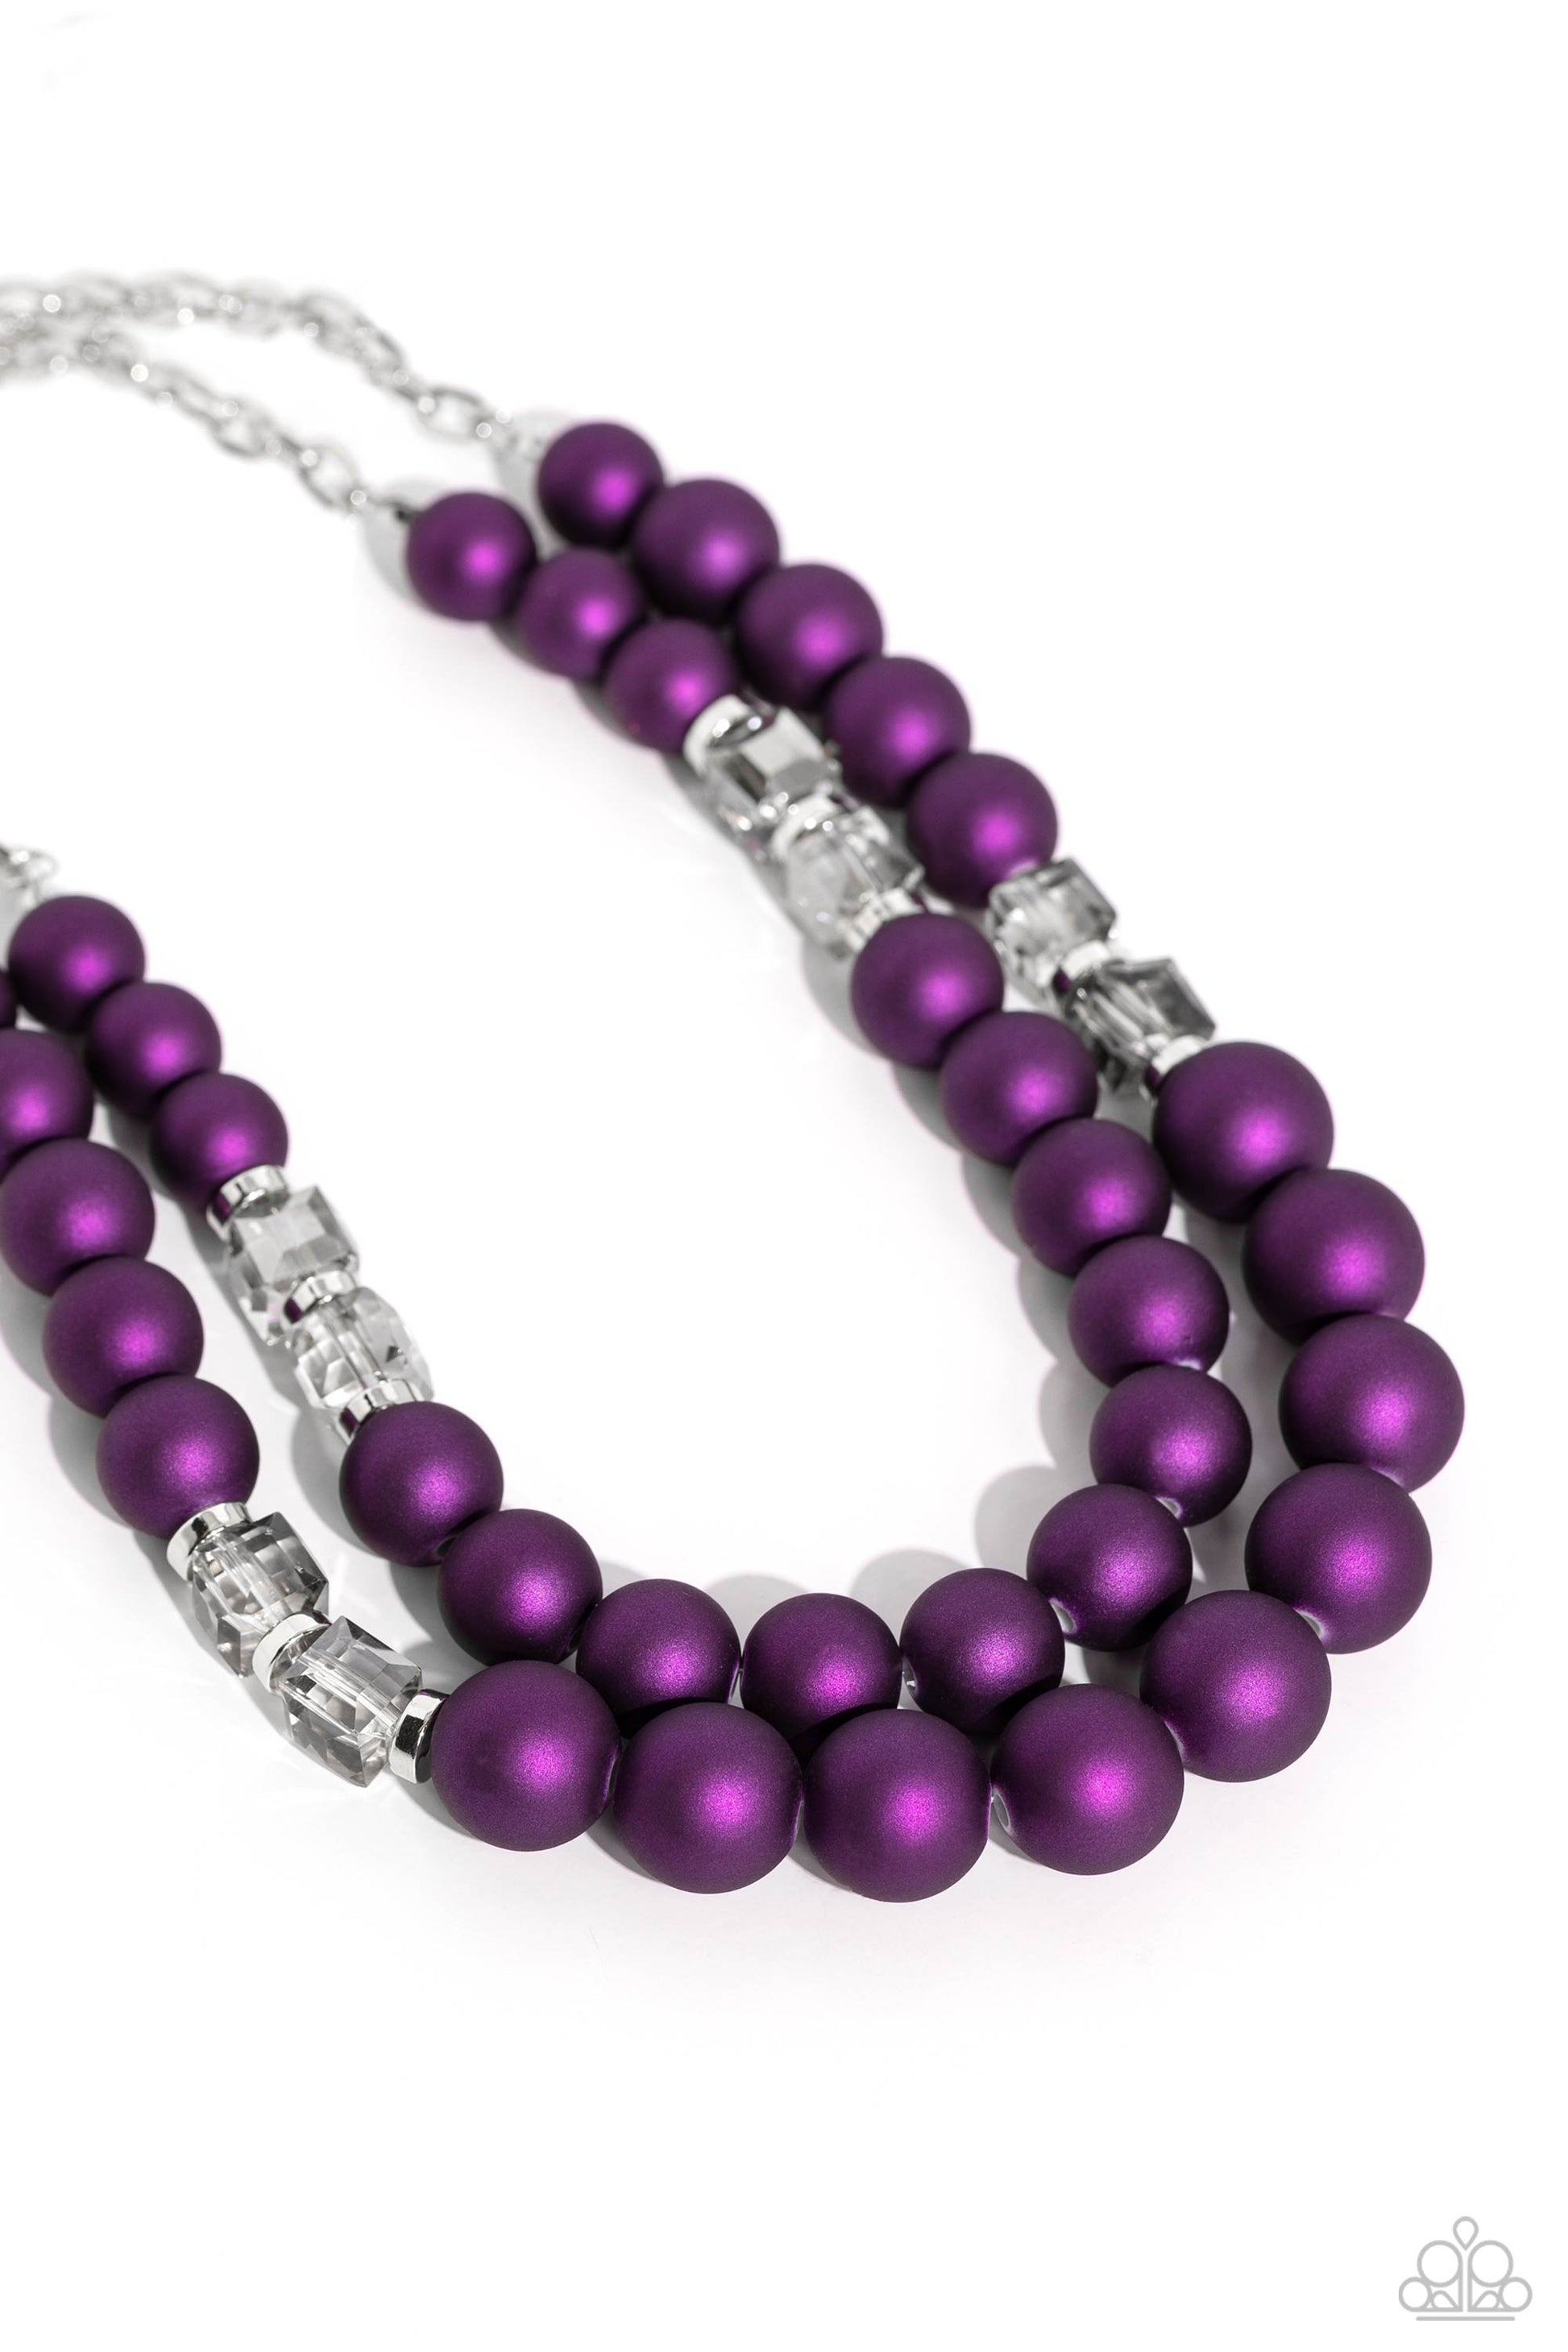 two rows of oversized purple beads featuring a subtle shimmer, silver accents, and clear gray cubed beads fall below the collar on silver paperclip chains, creating refined, colorful layers. Features an adjustable clasp closure. Sold as one individual necklace. Includes one pair of matching earrings. Two strands of oversized purple beads featuring a subtle shimmer, silver accents, and clear gray cubed beads stretch around the wrist, creating refined, colorful layers.